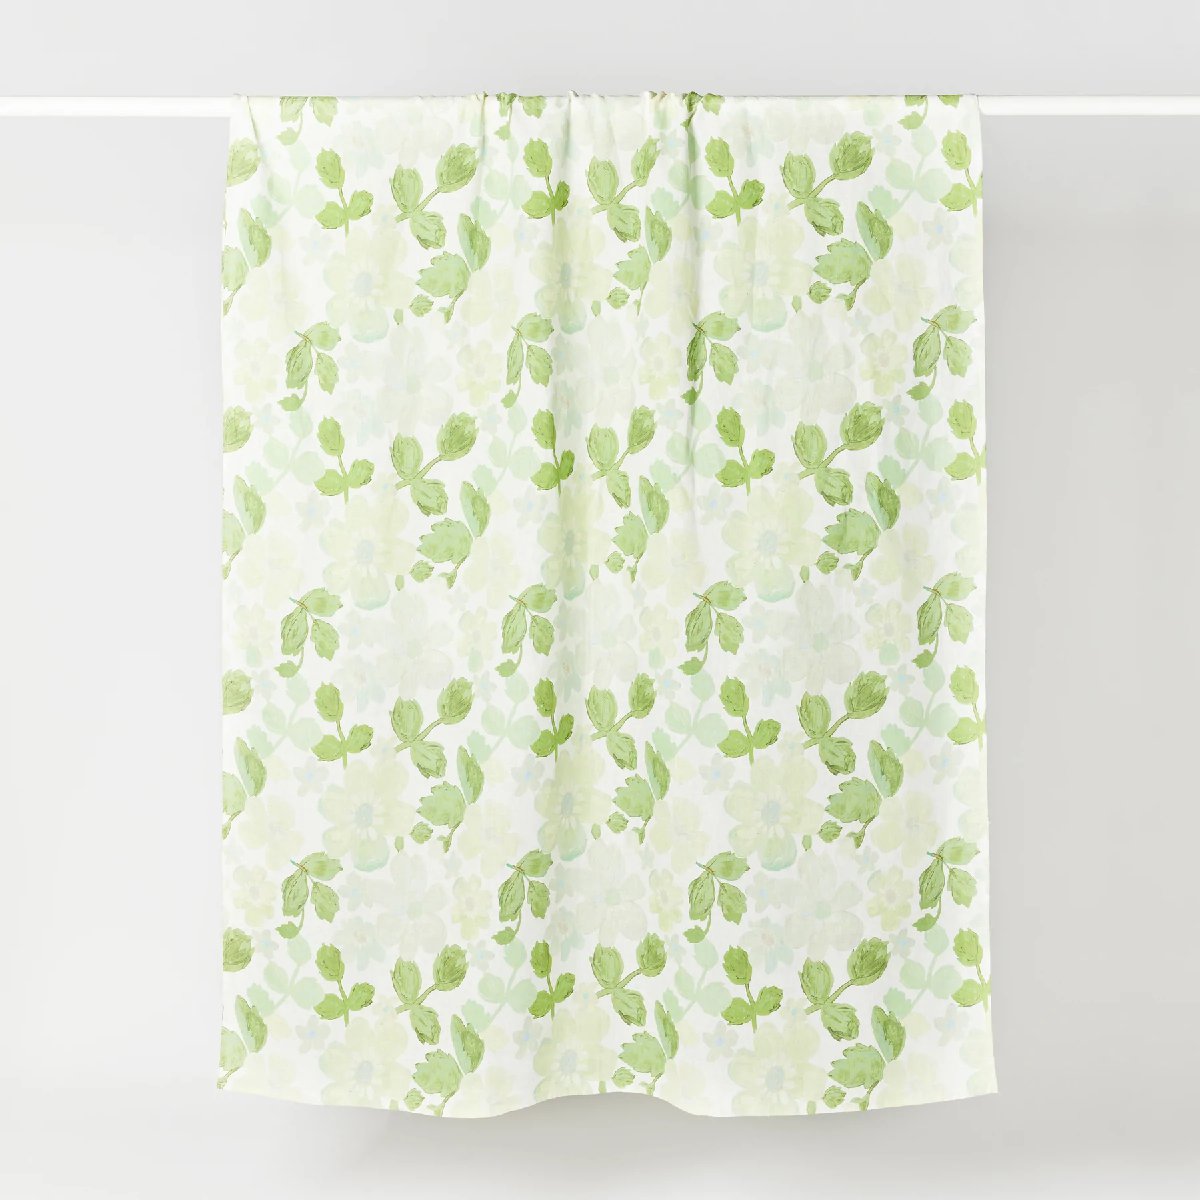 Bonnie and Neil linen tablecloth - mini pastel floral green - large - hang